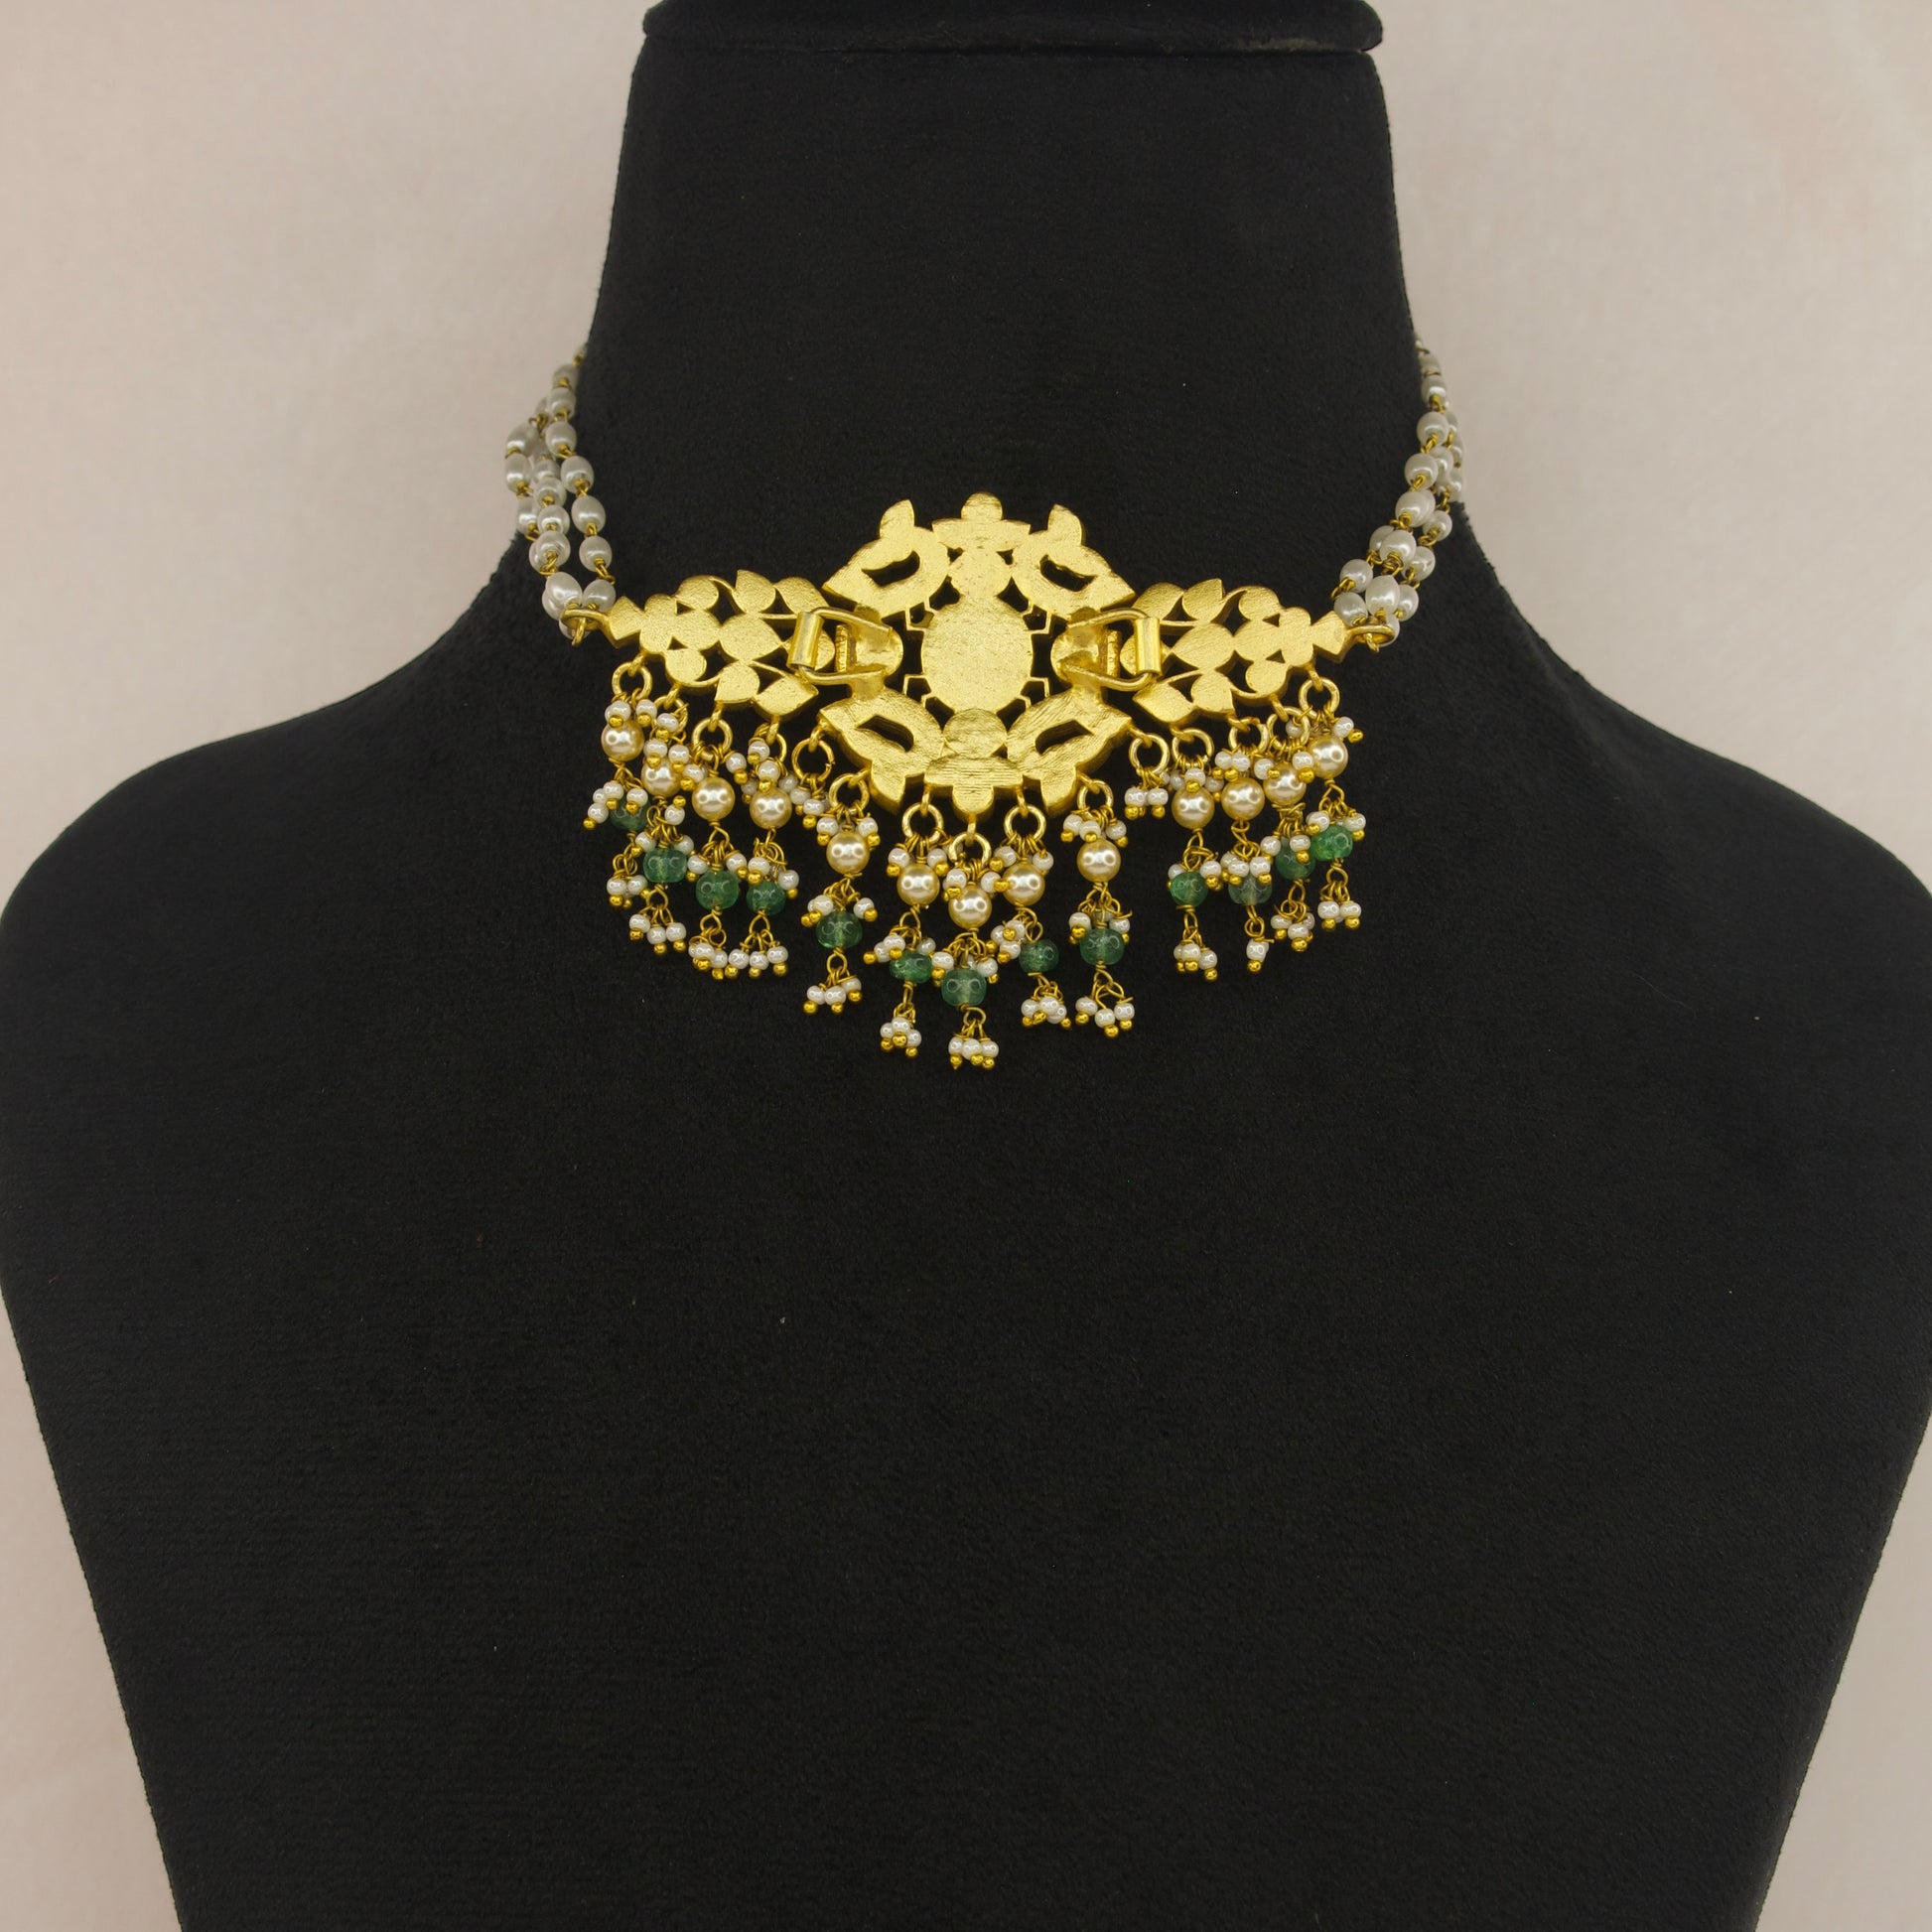 Gold Plated Jadau Kundan Choker Necklace with Rice Pearls with 22k gold plating. This Product belongs to Jadau Kundan jewellery Category